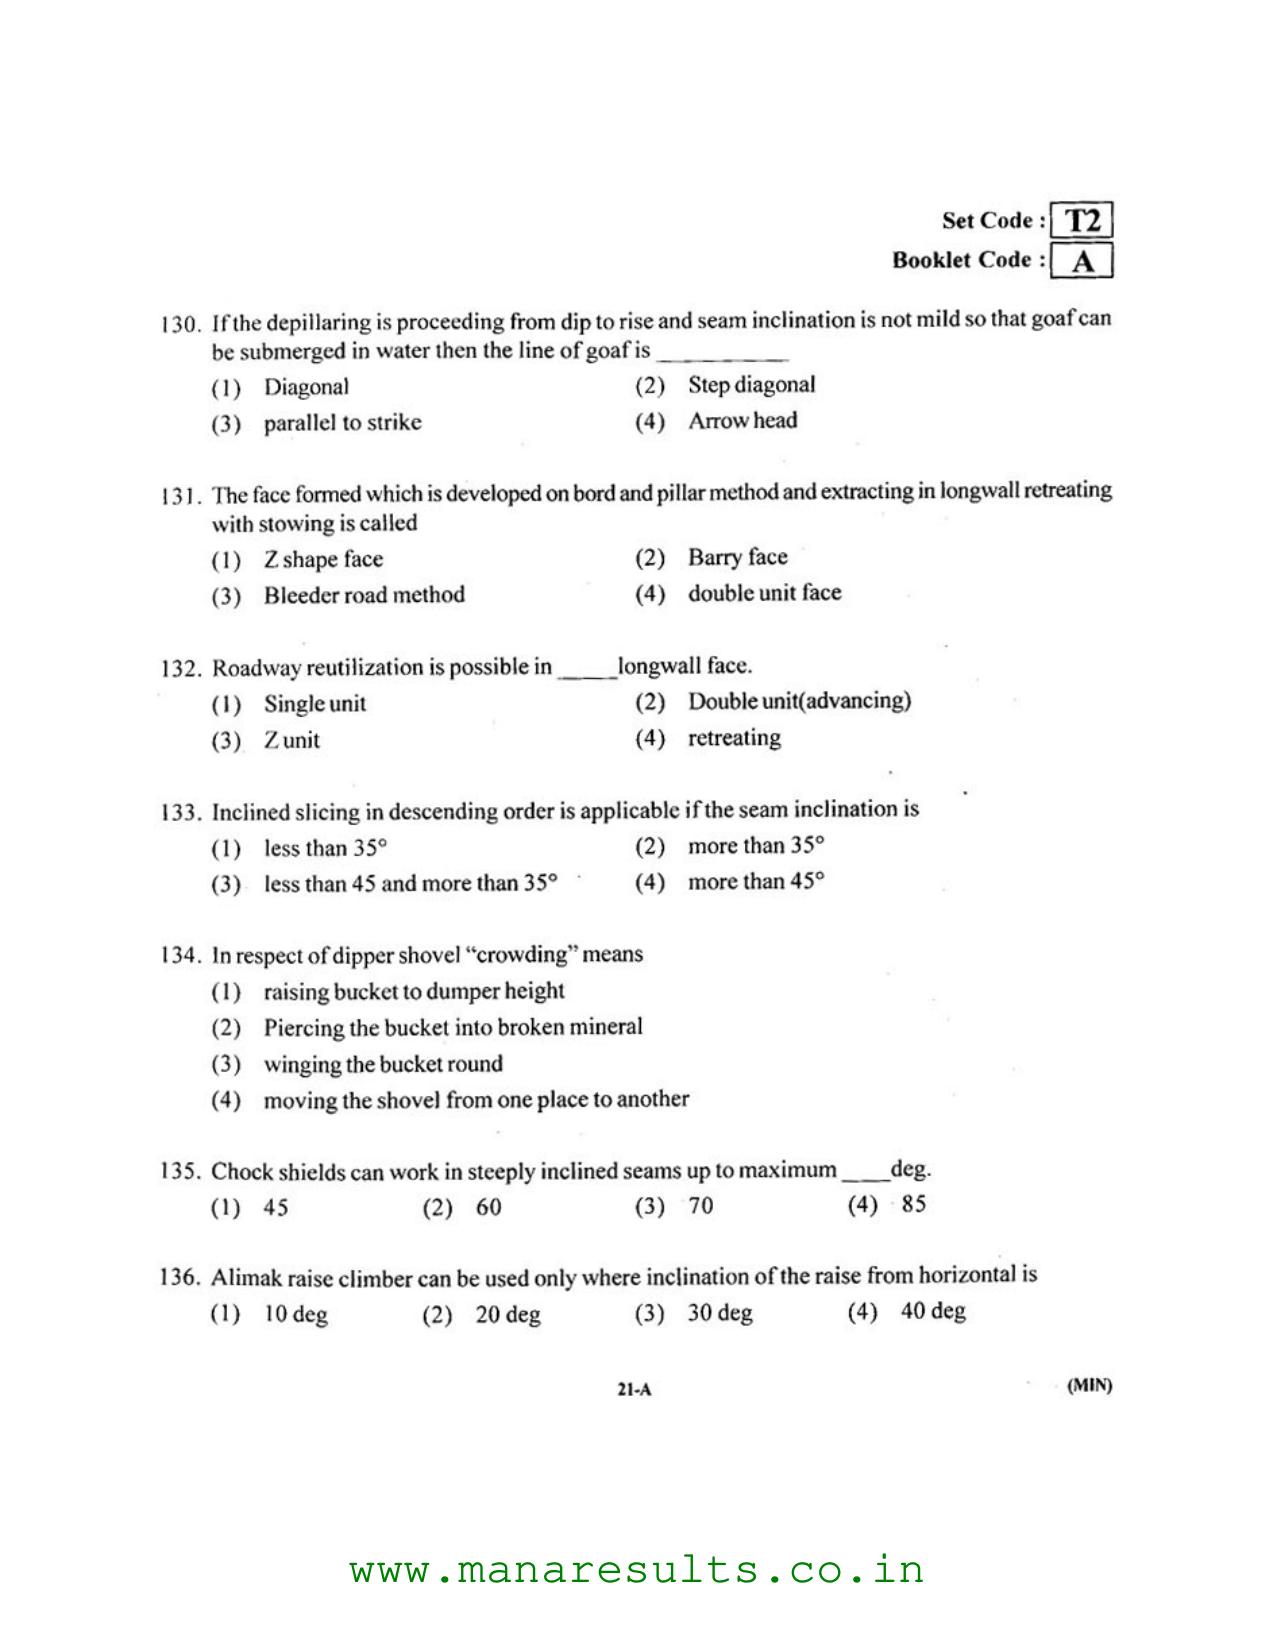 AP ECET 2016 Mining Engineering Old Previous Question Papers - Page 20